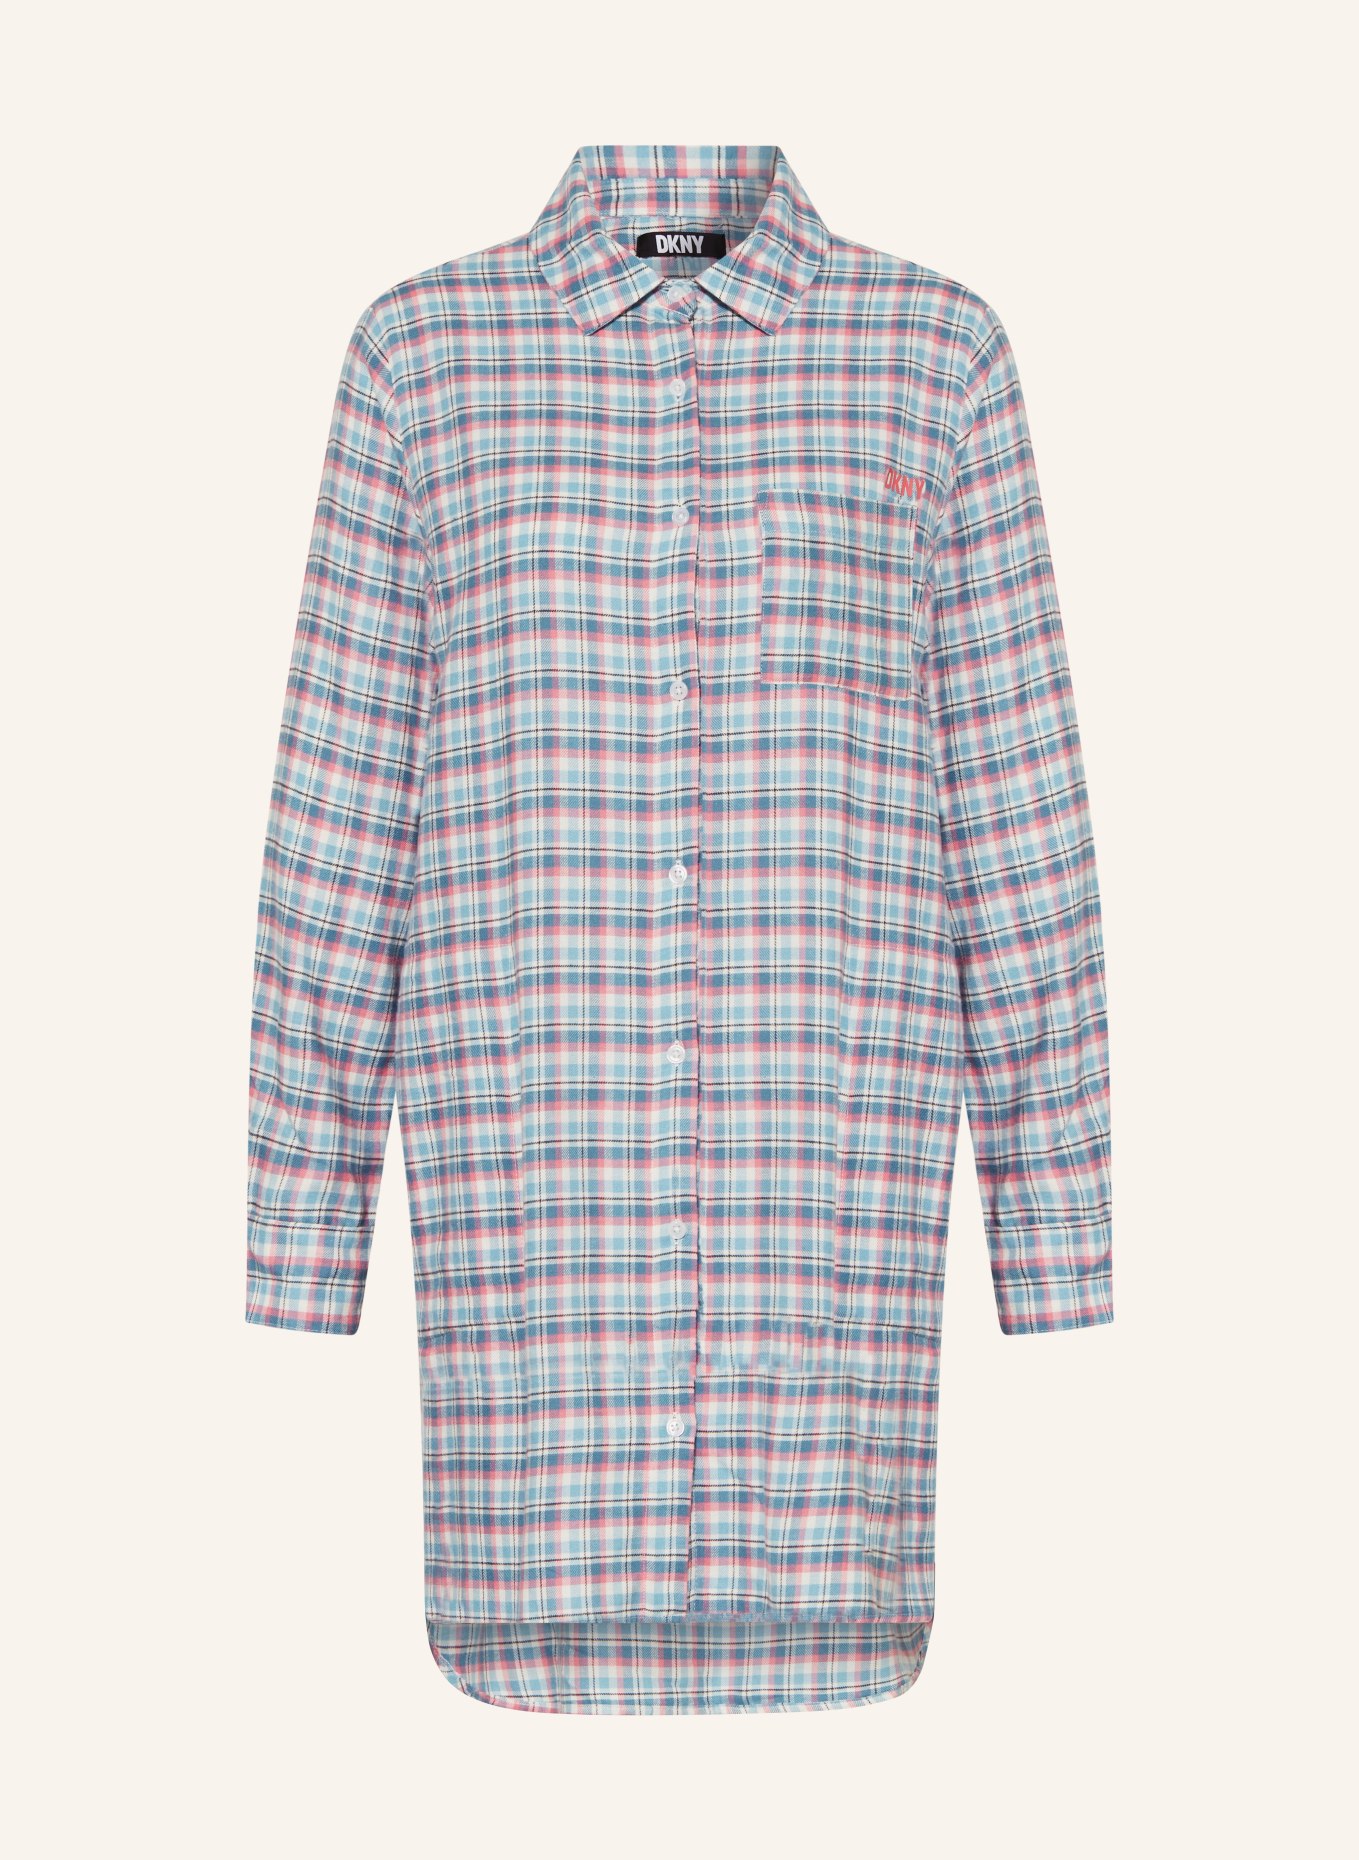 DKNY Nightgown in flannel, Color: LIGHT BLUE/ WHITE/ PINK (Image 1)